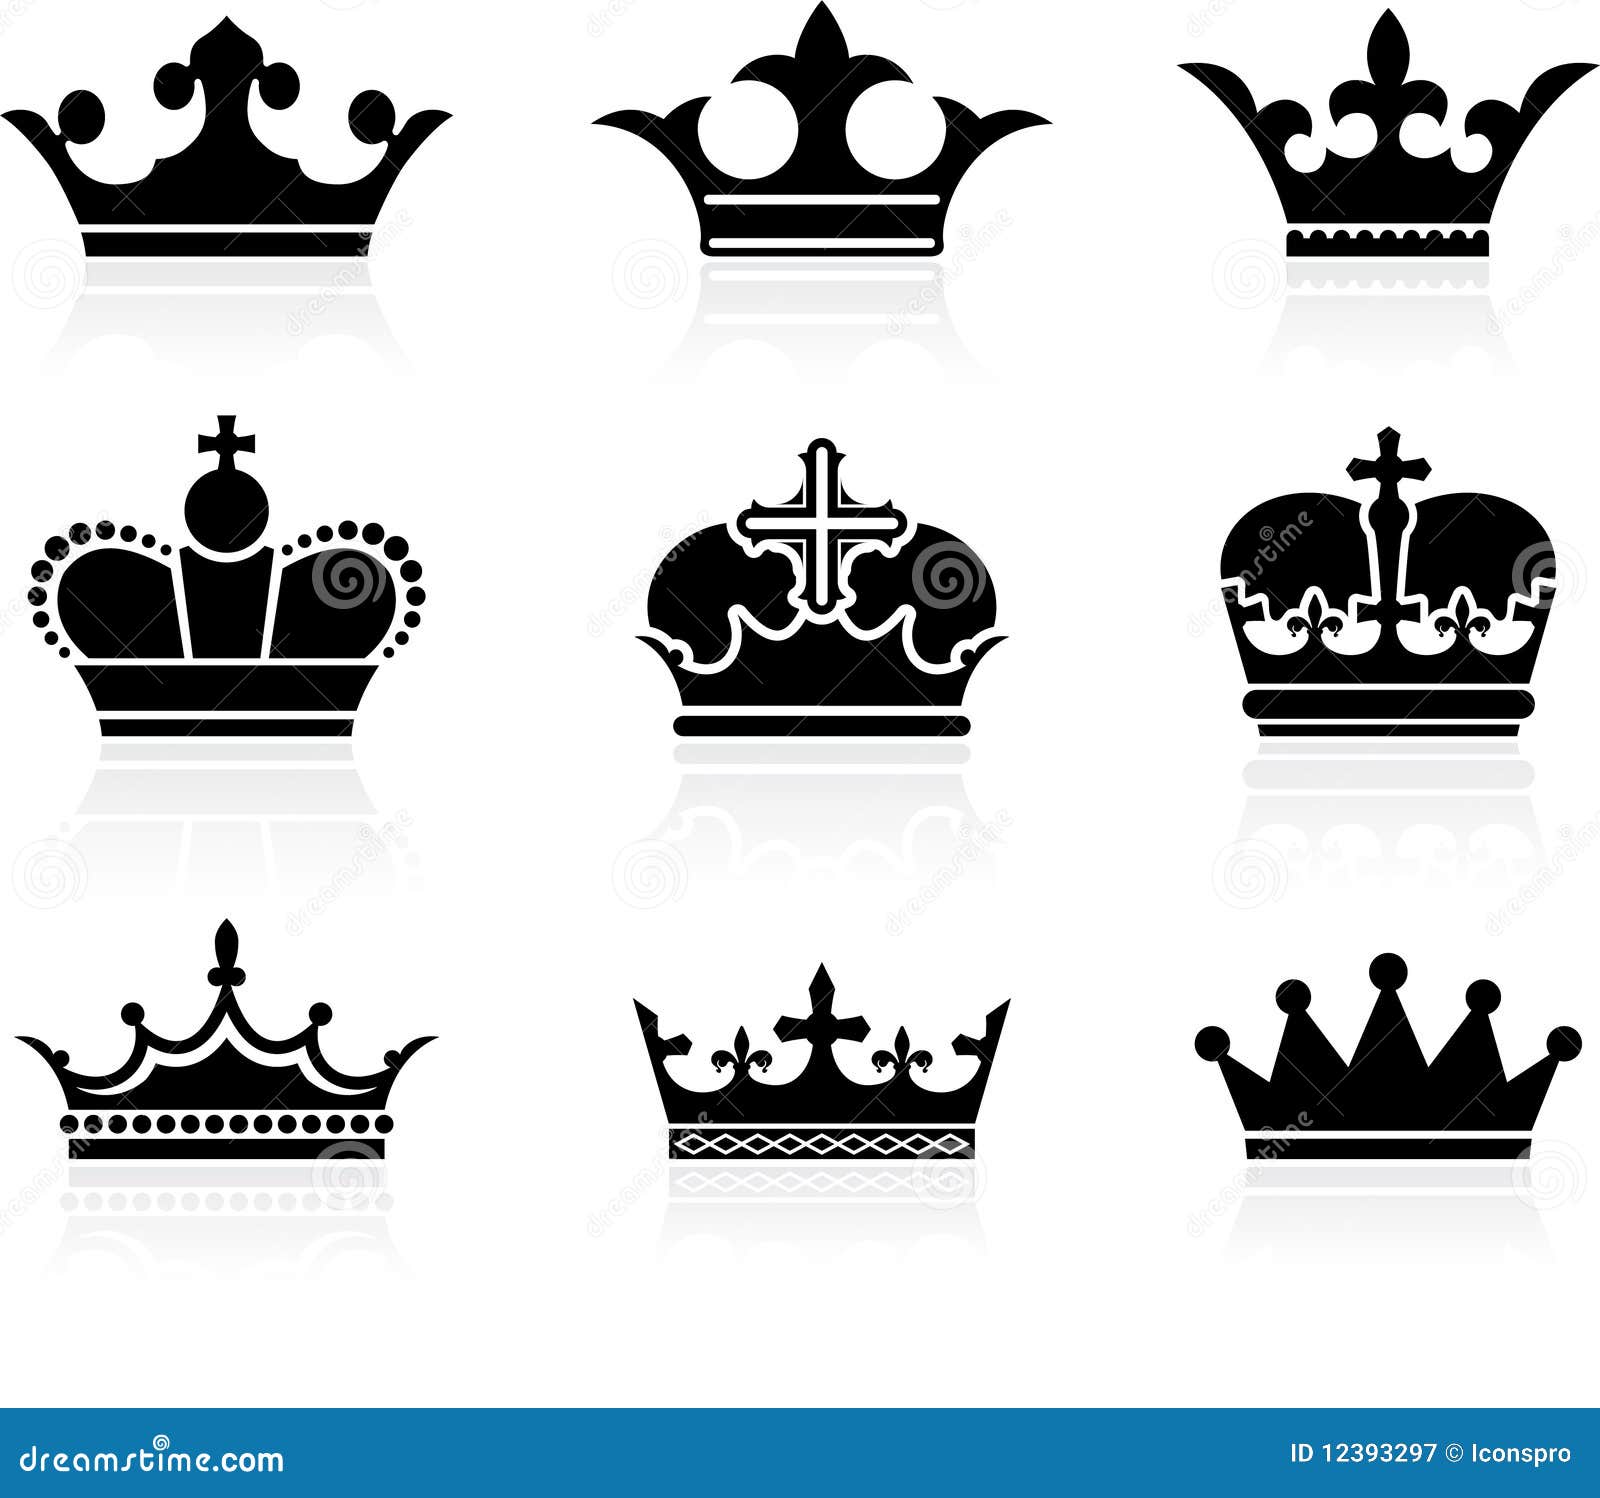 royalty free crown clipart - photo #14